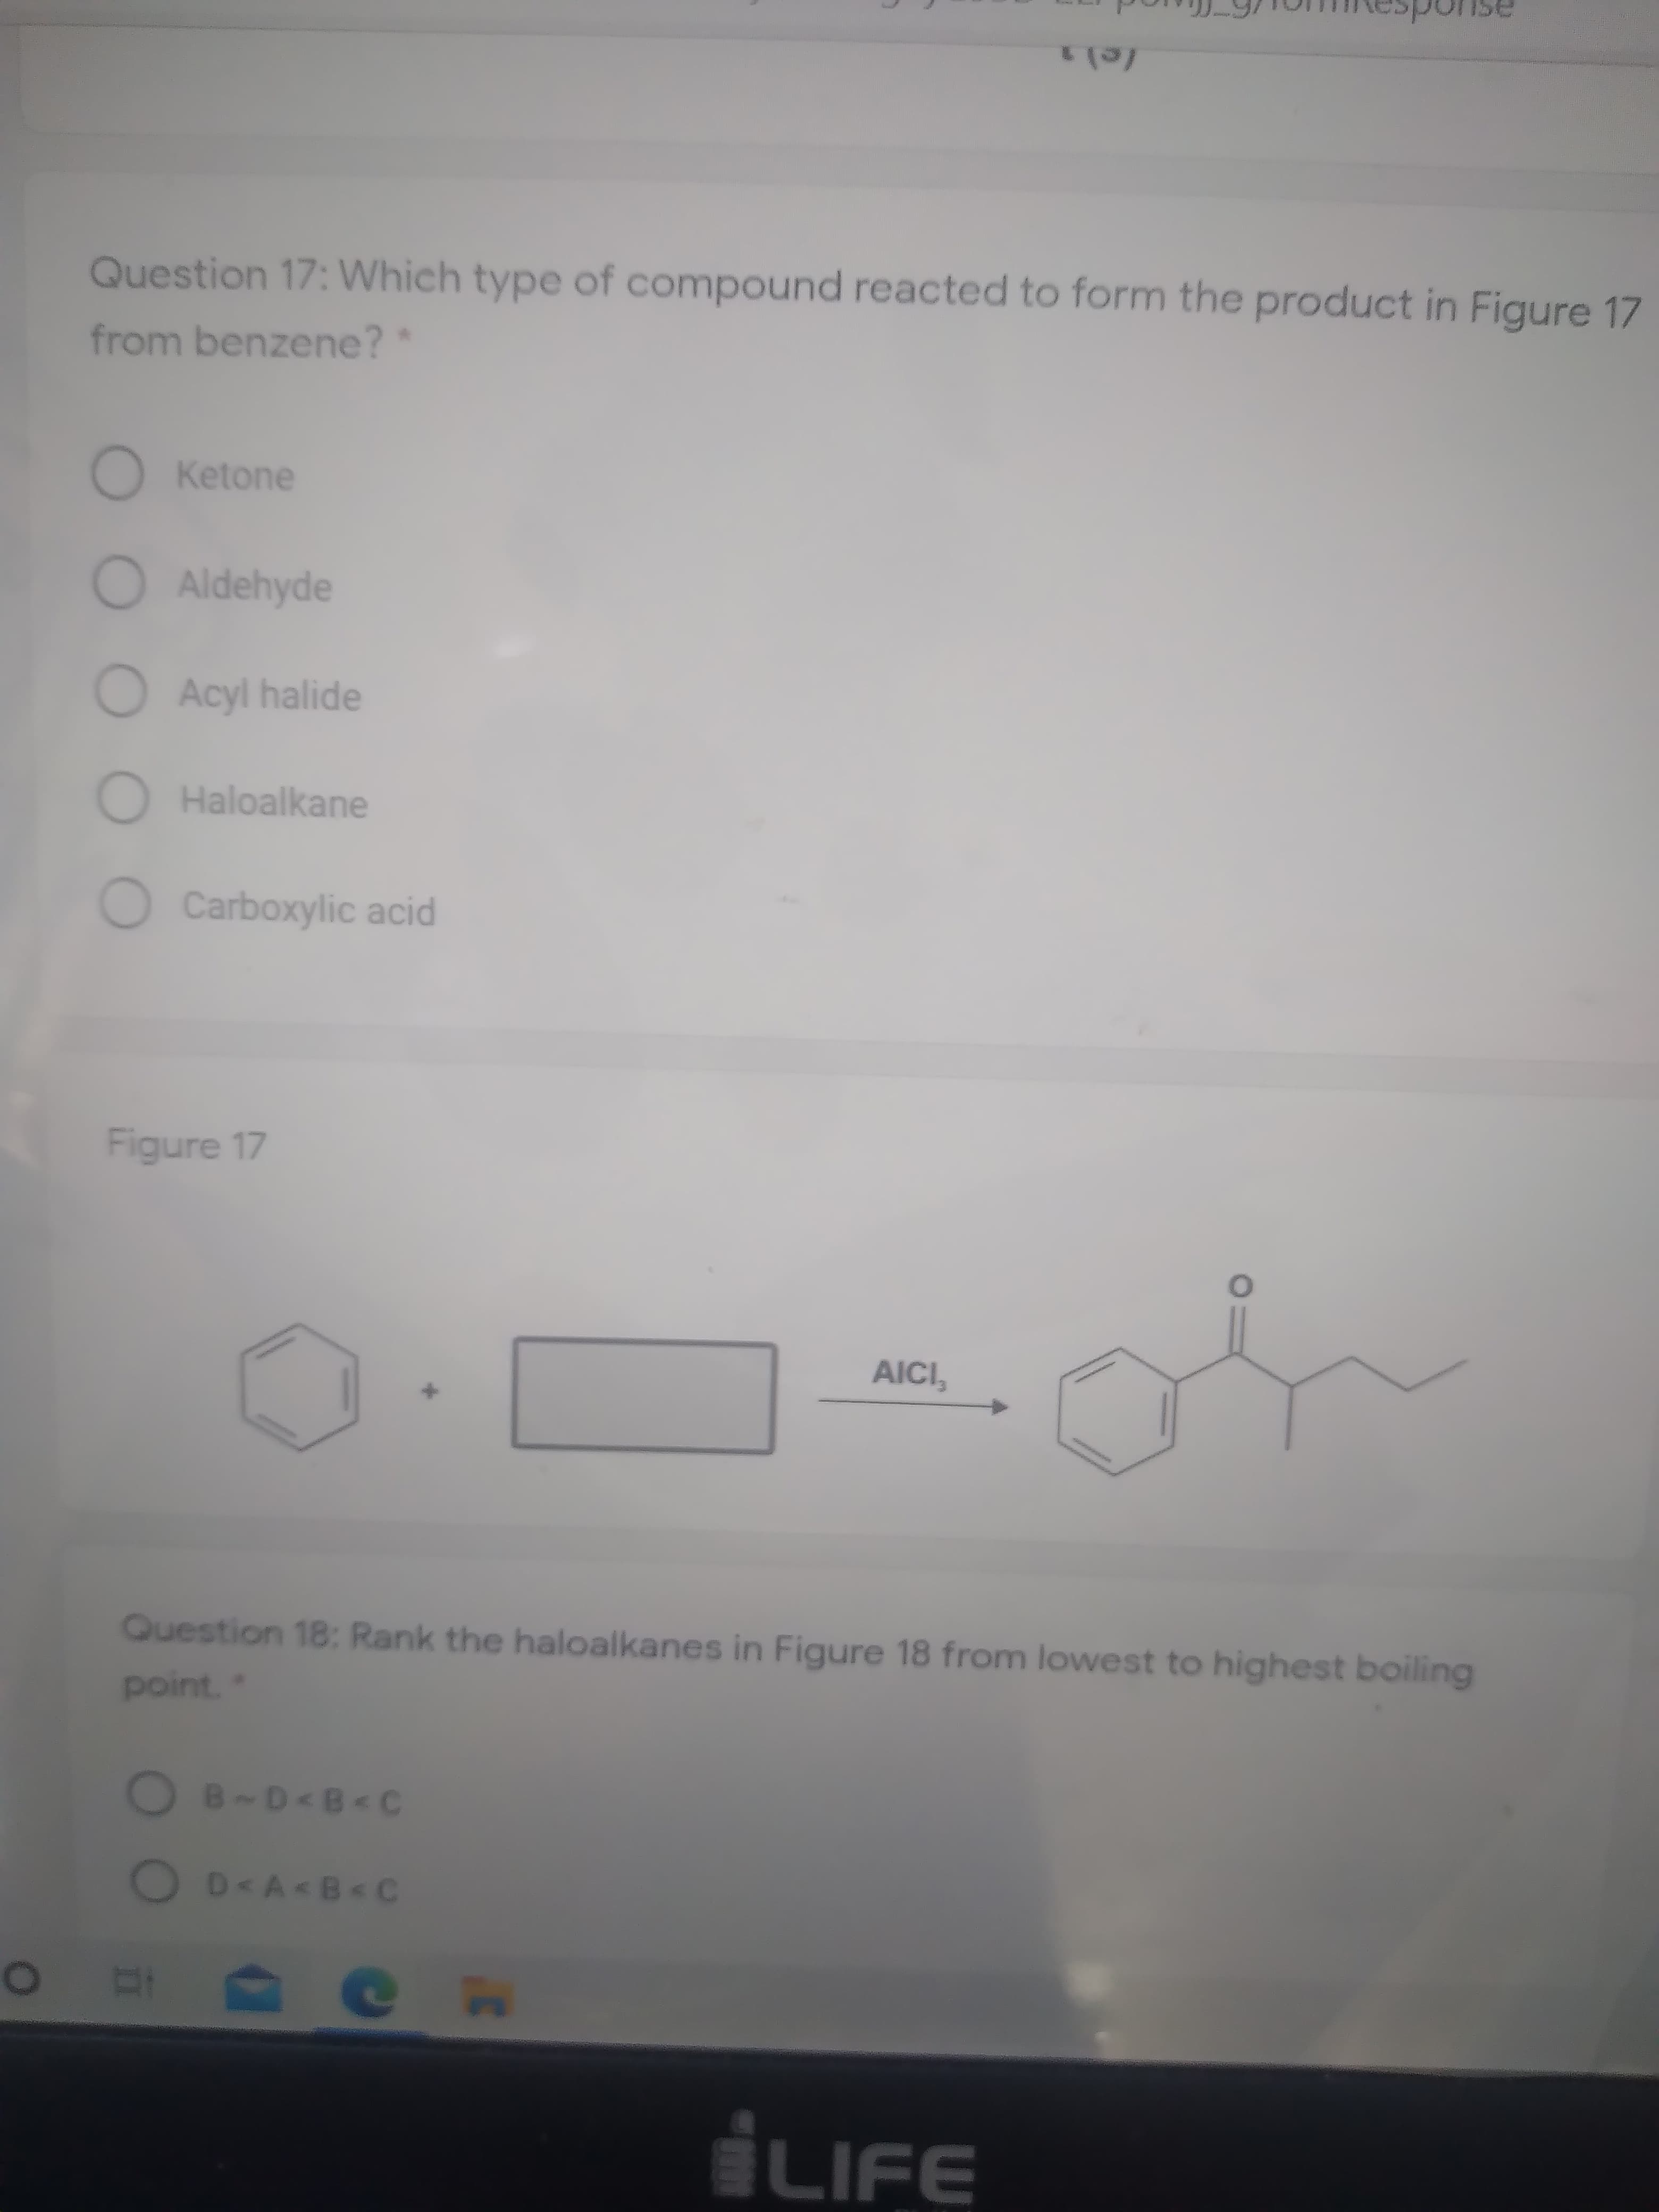 Question 17: Which type of compound reacted to form the product in Figure 17
from benzene?*
O Ketone
Aldehyde
Acyl halide
Haloalkane
OCarboxylic acid
Figure 17
AICI,
Question 18: Rank the haloalkanes in Figure 18 from lowest to highest boiling
point."
OB-D<B< C
OD<A<B<C
0O
LIFE
